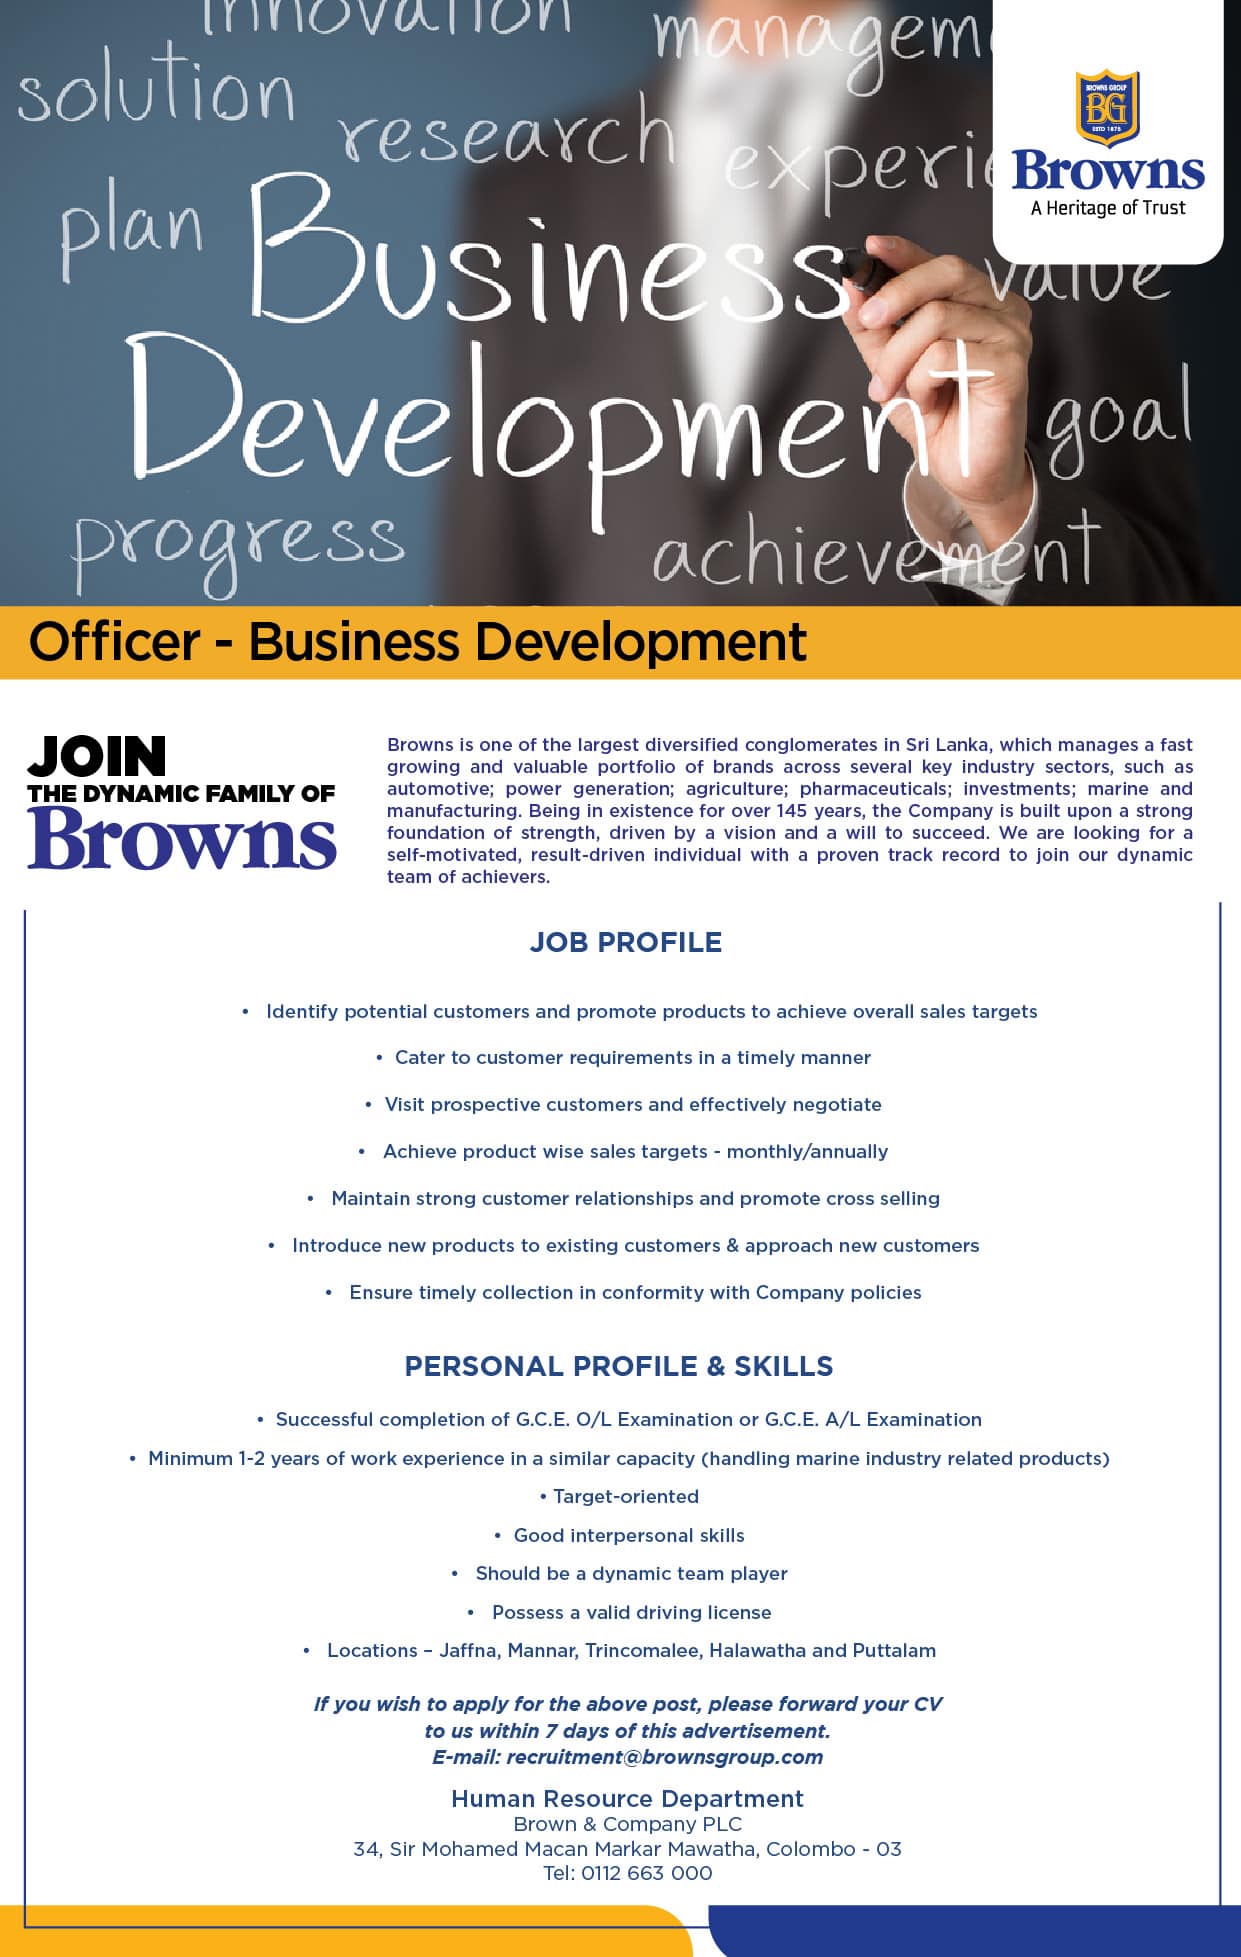 Officer (Business Development) Jobs Vacancies - Brown and Company Jobs Details